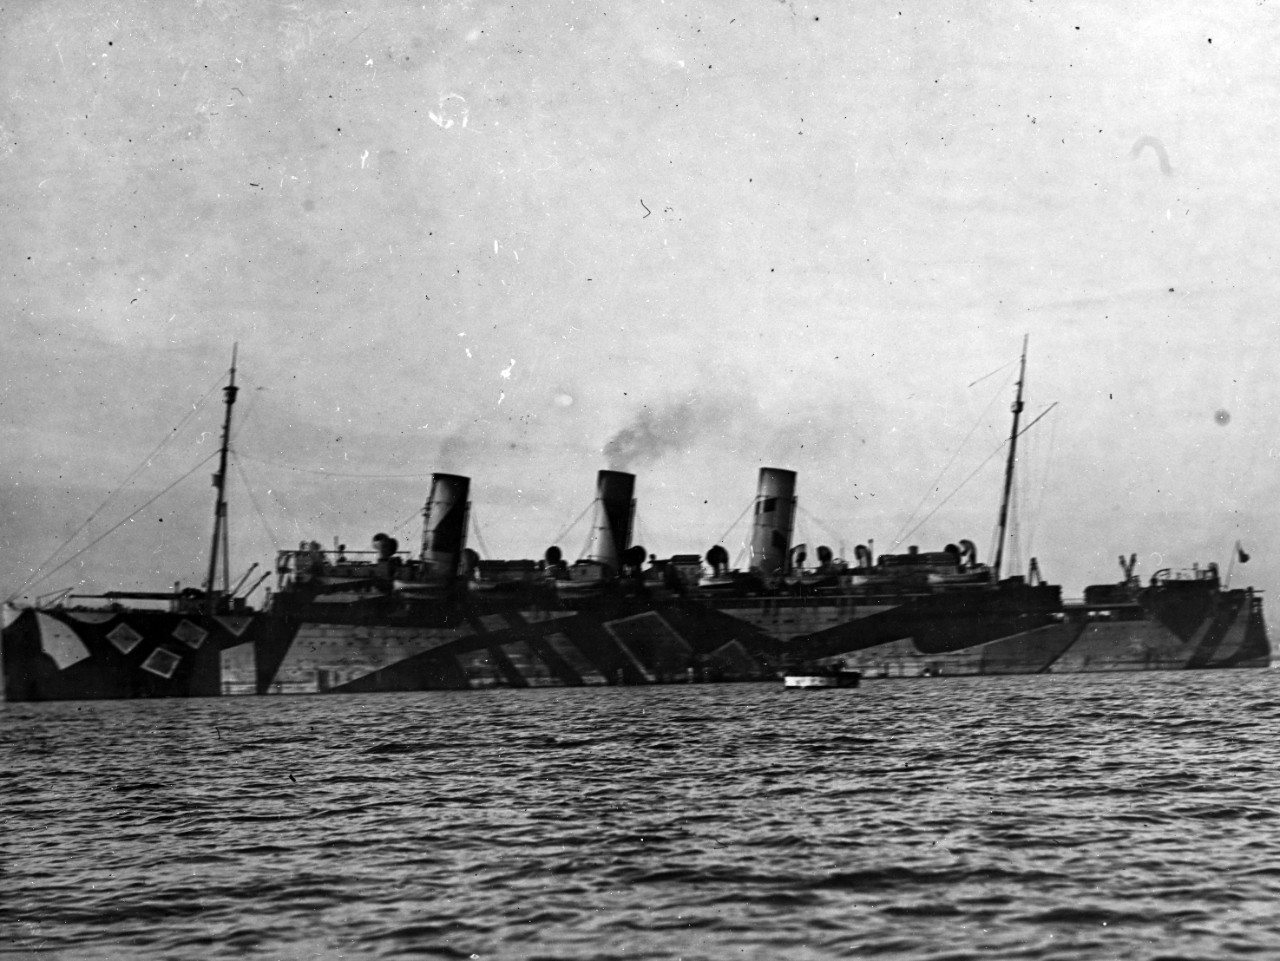 S.S. EMPRESS OF ASIA or EMPRESS OF RUSSIA (British AMC/ transports, 1912-1942, Asia, 1912-1945, Russia)